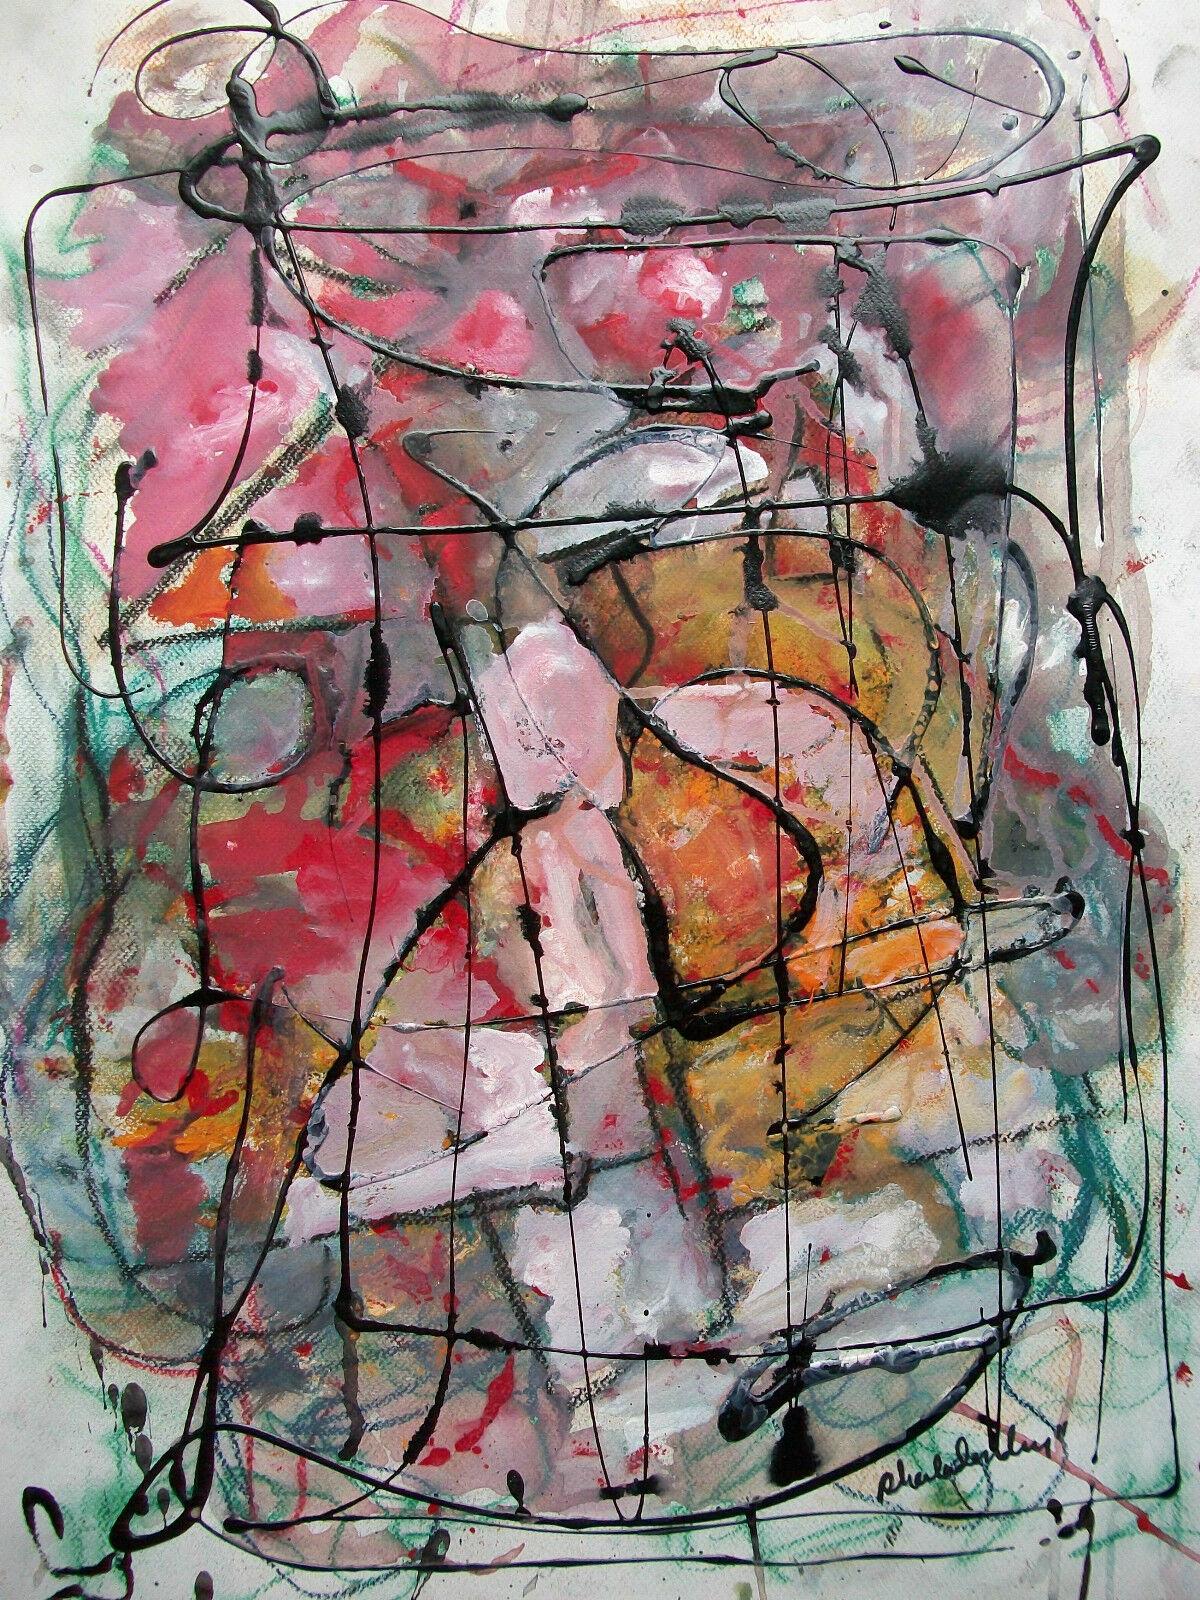 Sheila Denaburg - Contemporary Expressionist style double sided mixed media painting on paper - extraordinary quality and composition - untitled - unframed - signed - Canada - circa 2011.

Excellent condition - no loss - no damage - no restoration